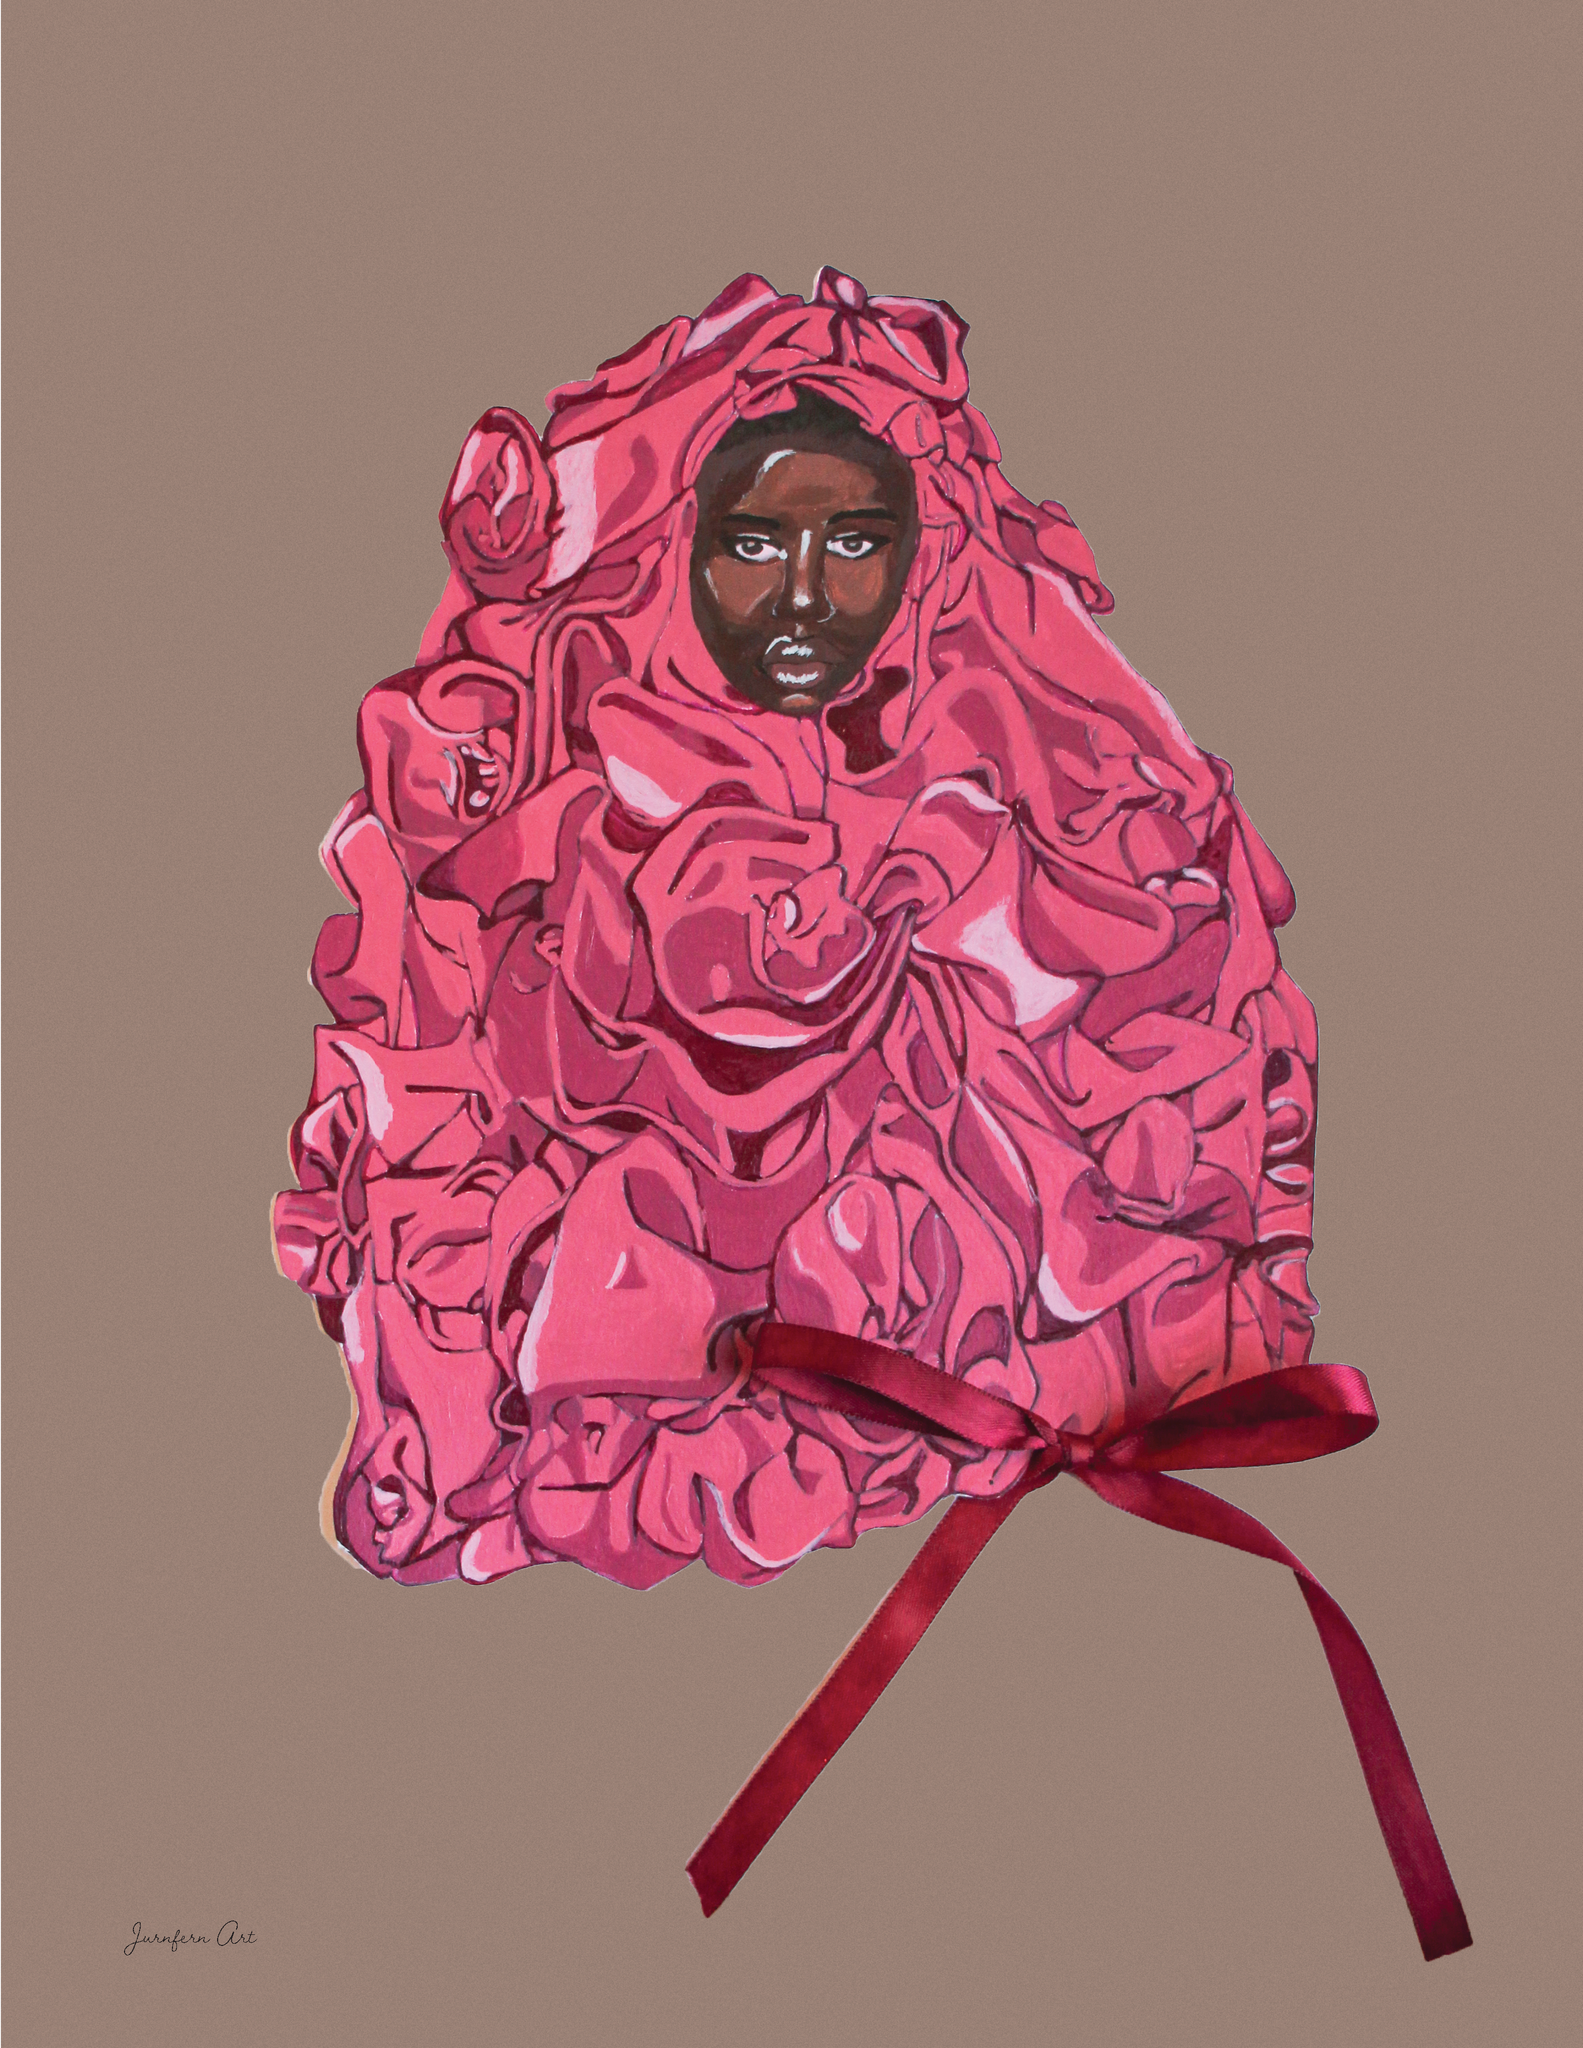 An art print with an illustration of Black supermodel Adut Akech wearing a pink Valentino gown with a bow on it, with a nude background color